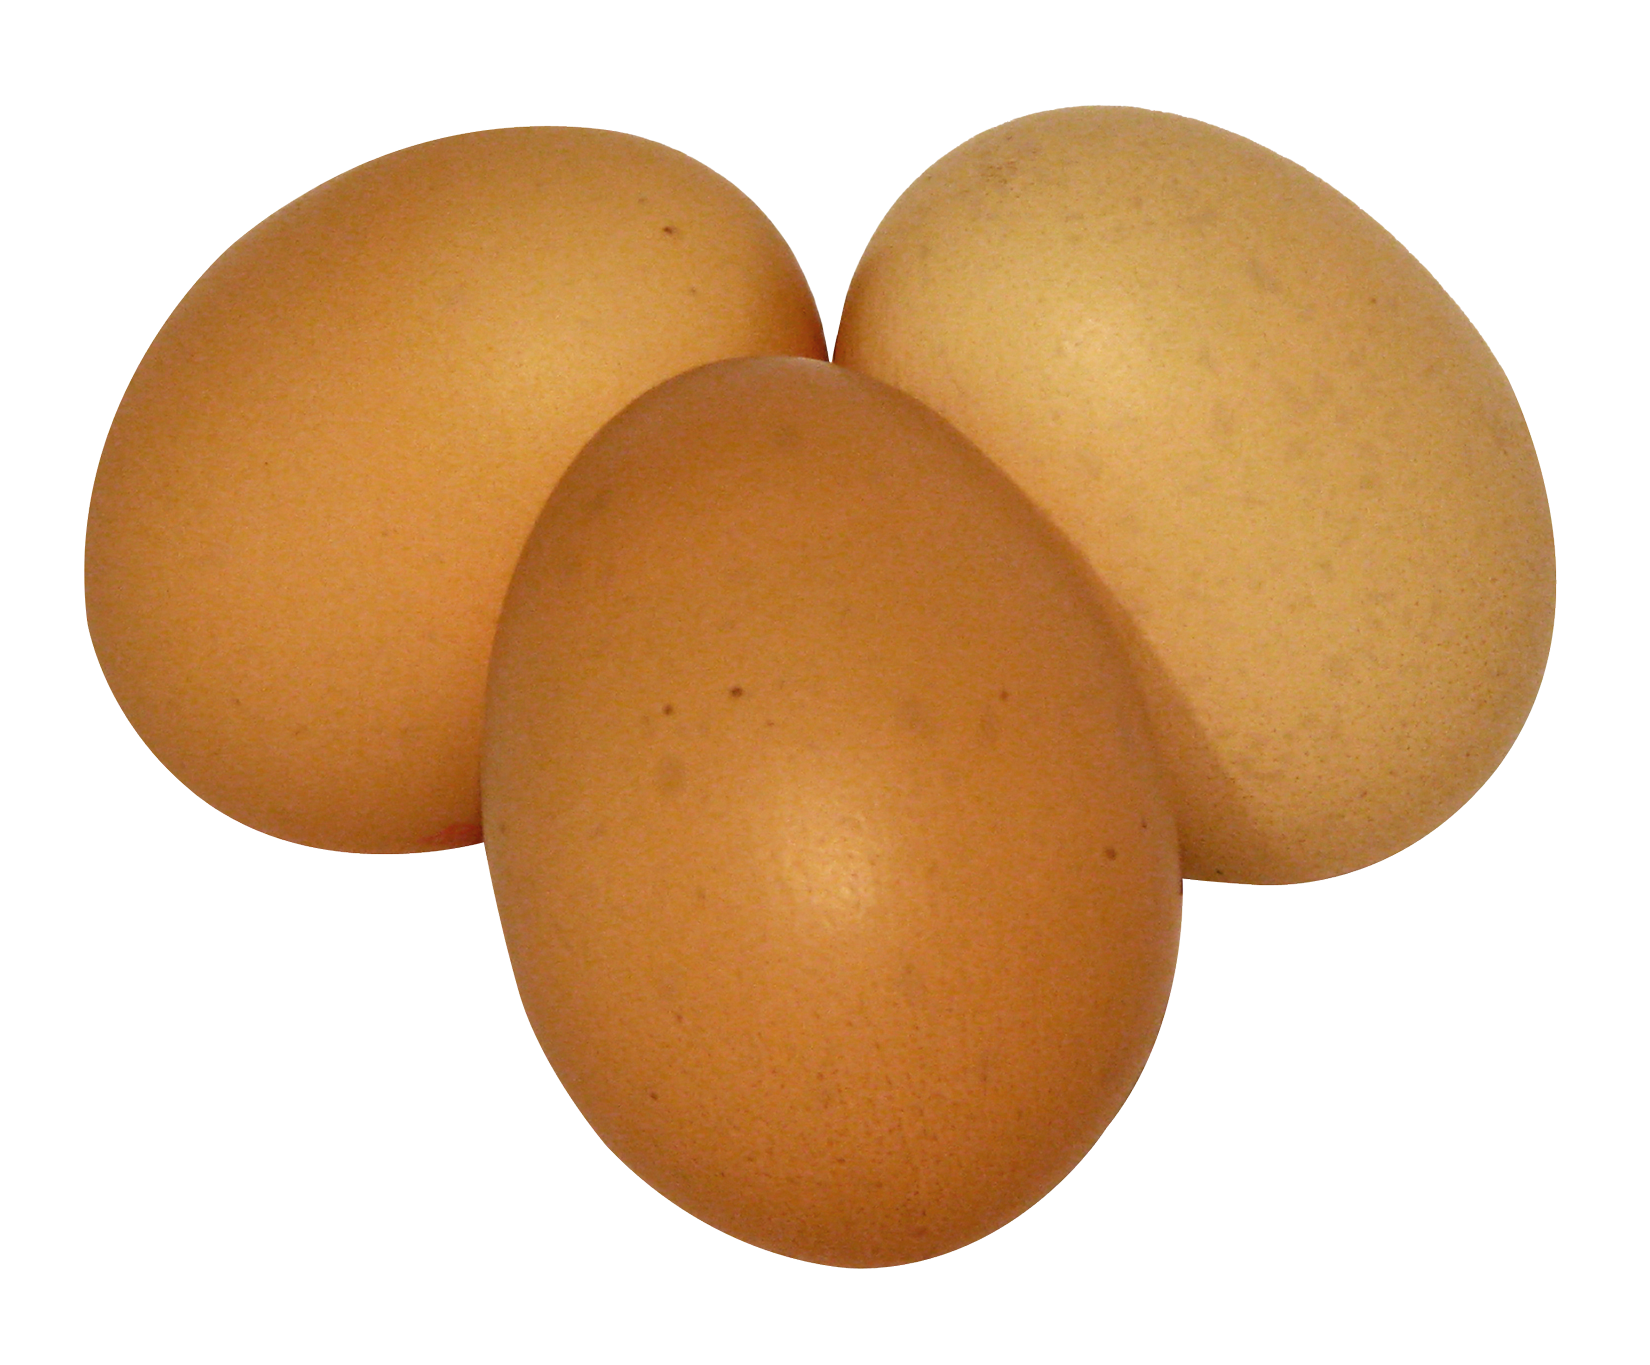 A Group Of Eggs On A Black Background